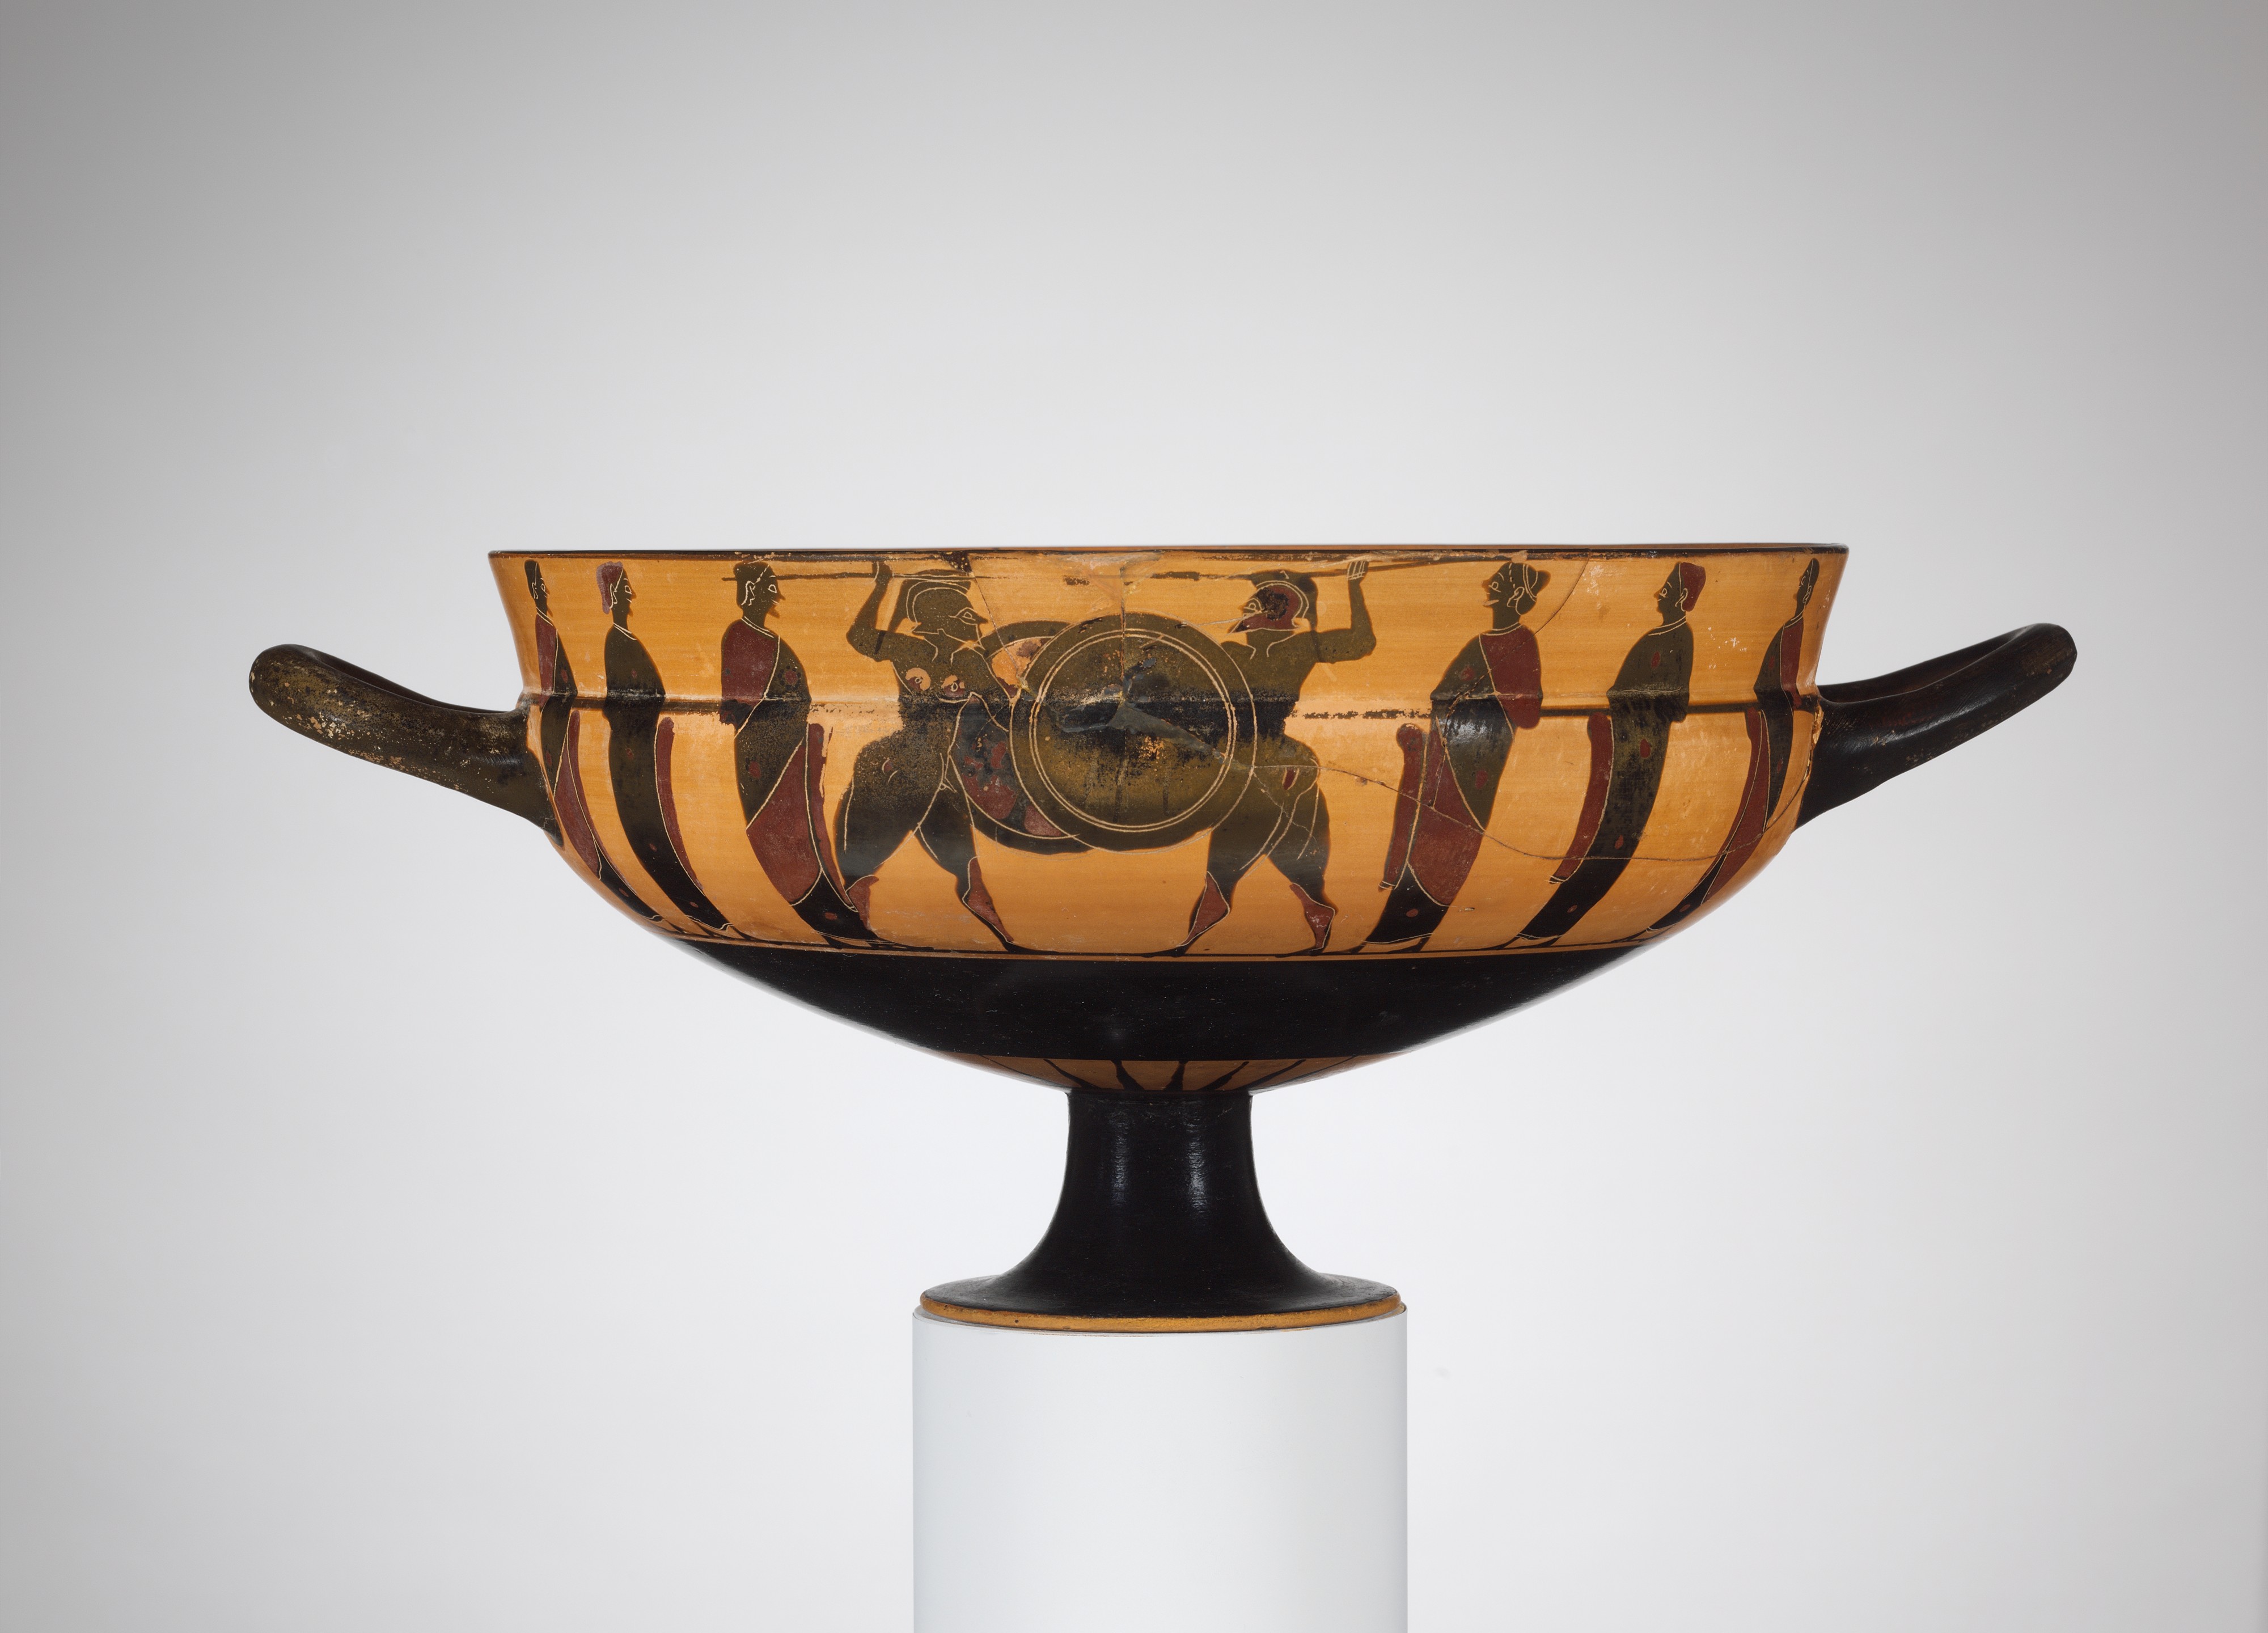 Terracotta (drinking | to kylix: Attic | Siana Attributed Archaic Museum of Painter The | | Greek, Sandal cup) Art the Metropolitan cup